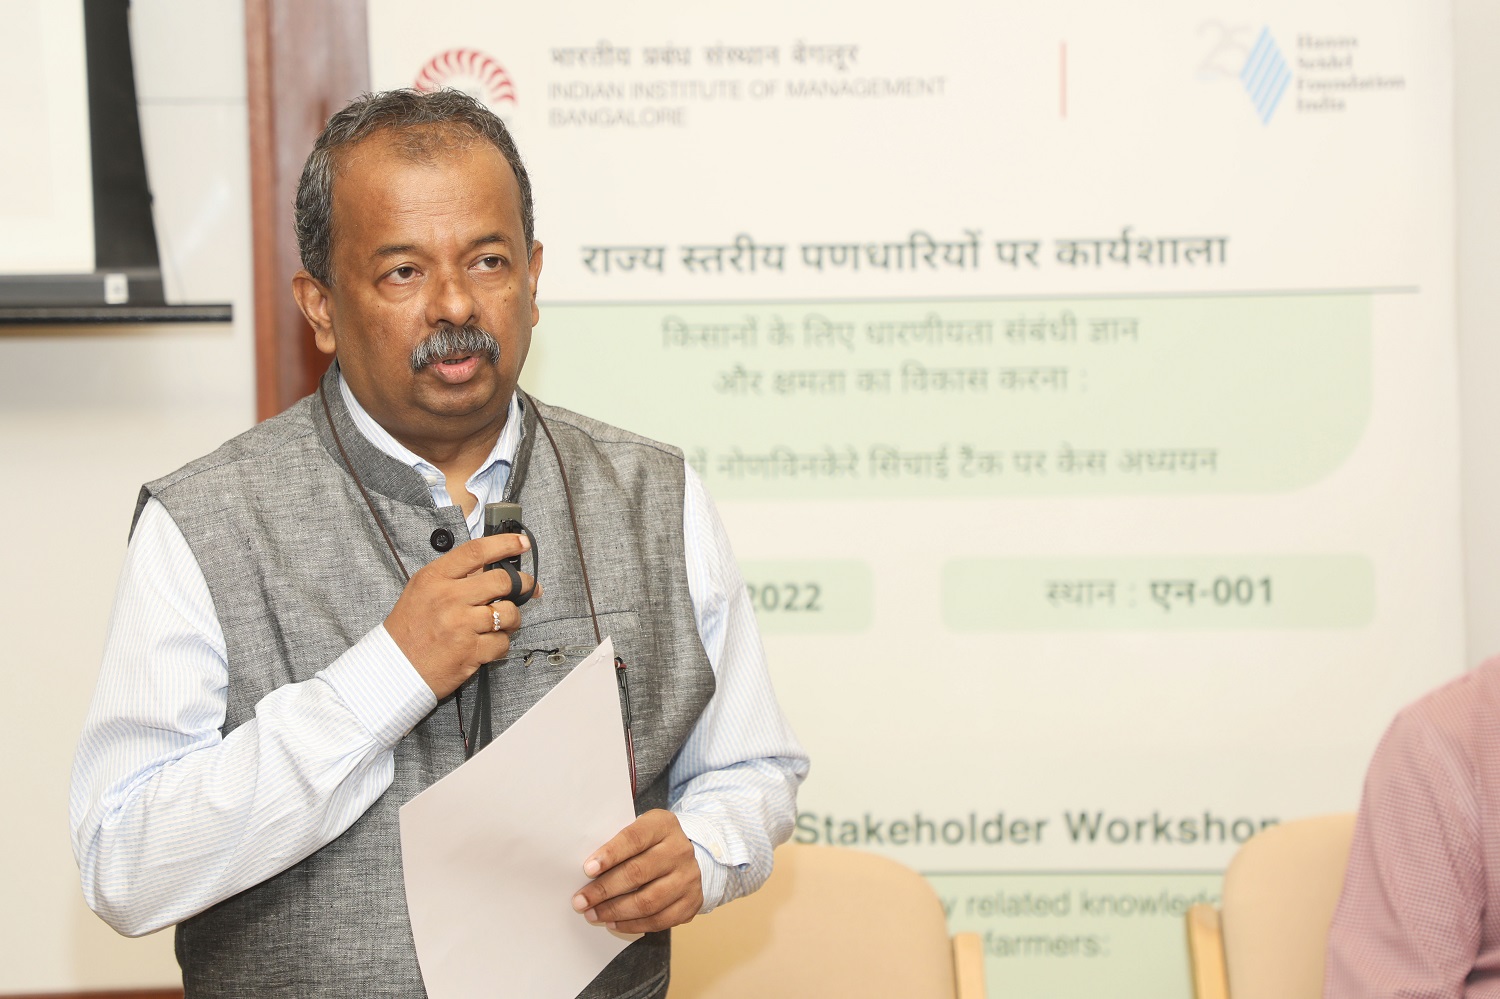 Professor Gopal Naik, faculty in the Economics and Social Sciences area, IIMB, welcomes the participants to the State Level Stakeholder Workshop on Developing sustainability related knowledge and capability for farmers: A Case Study of Nonavinakere Irrigation Tank in Tumkur on June 24, 2022.